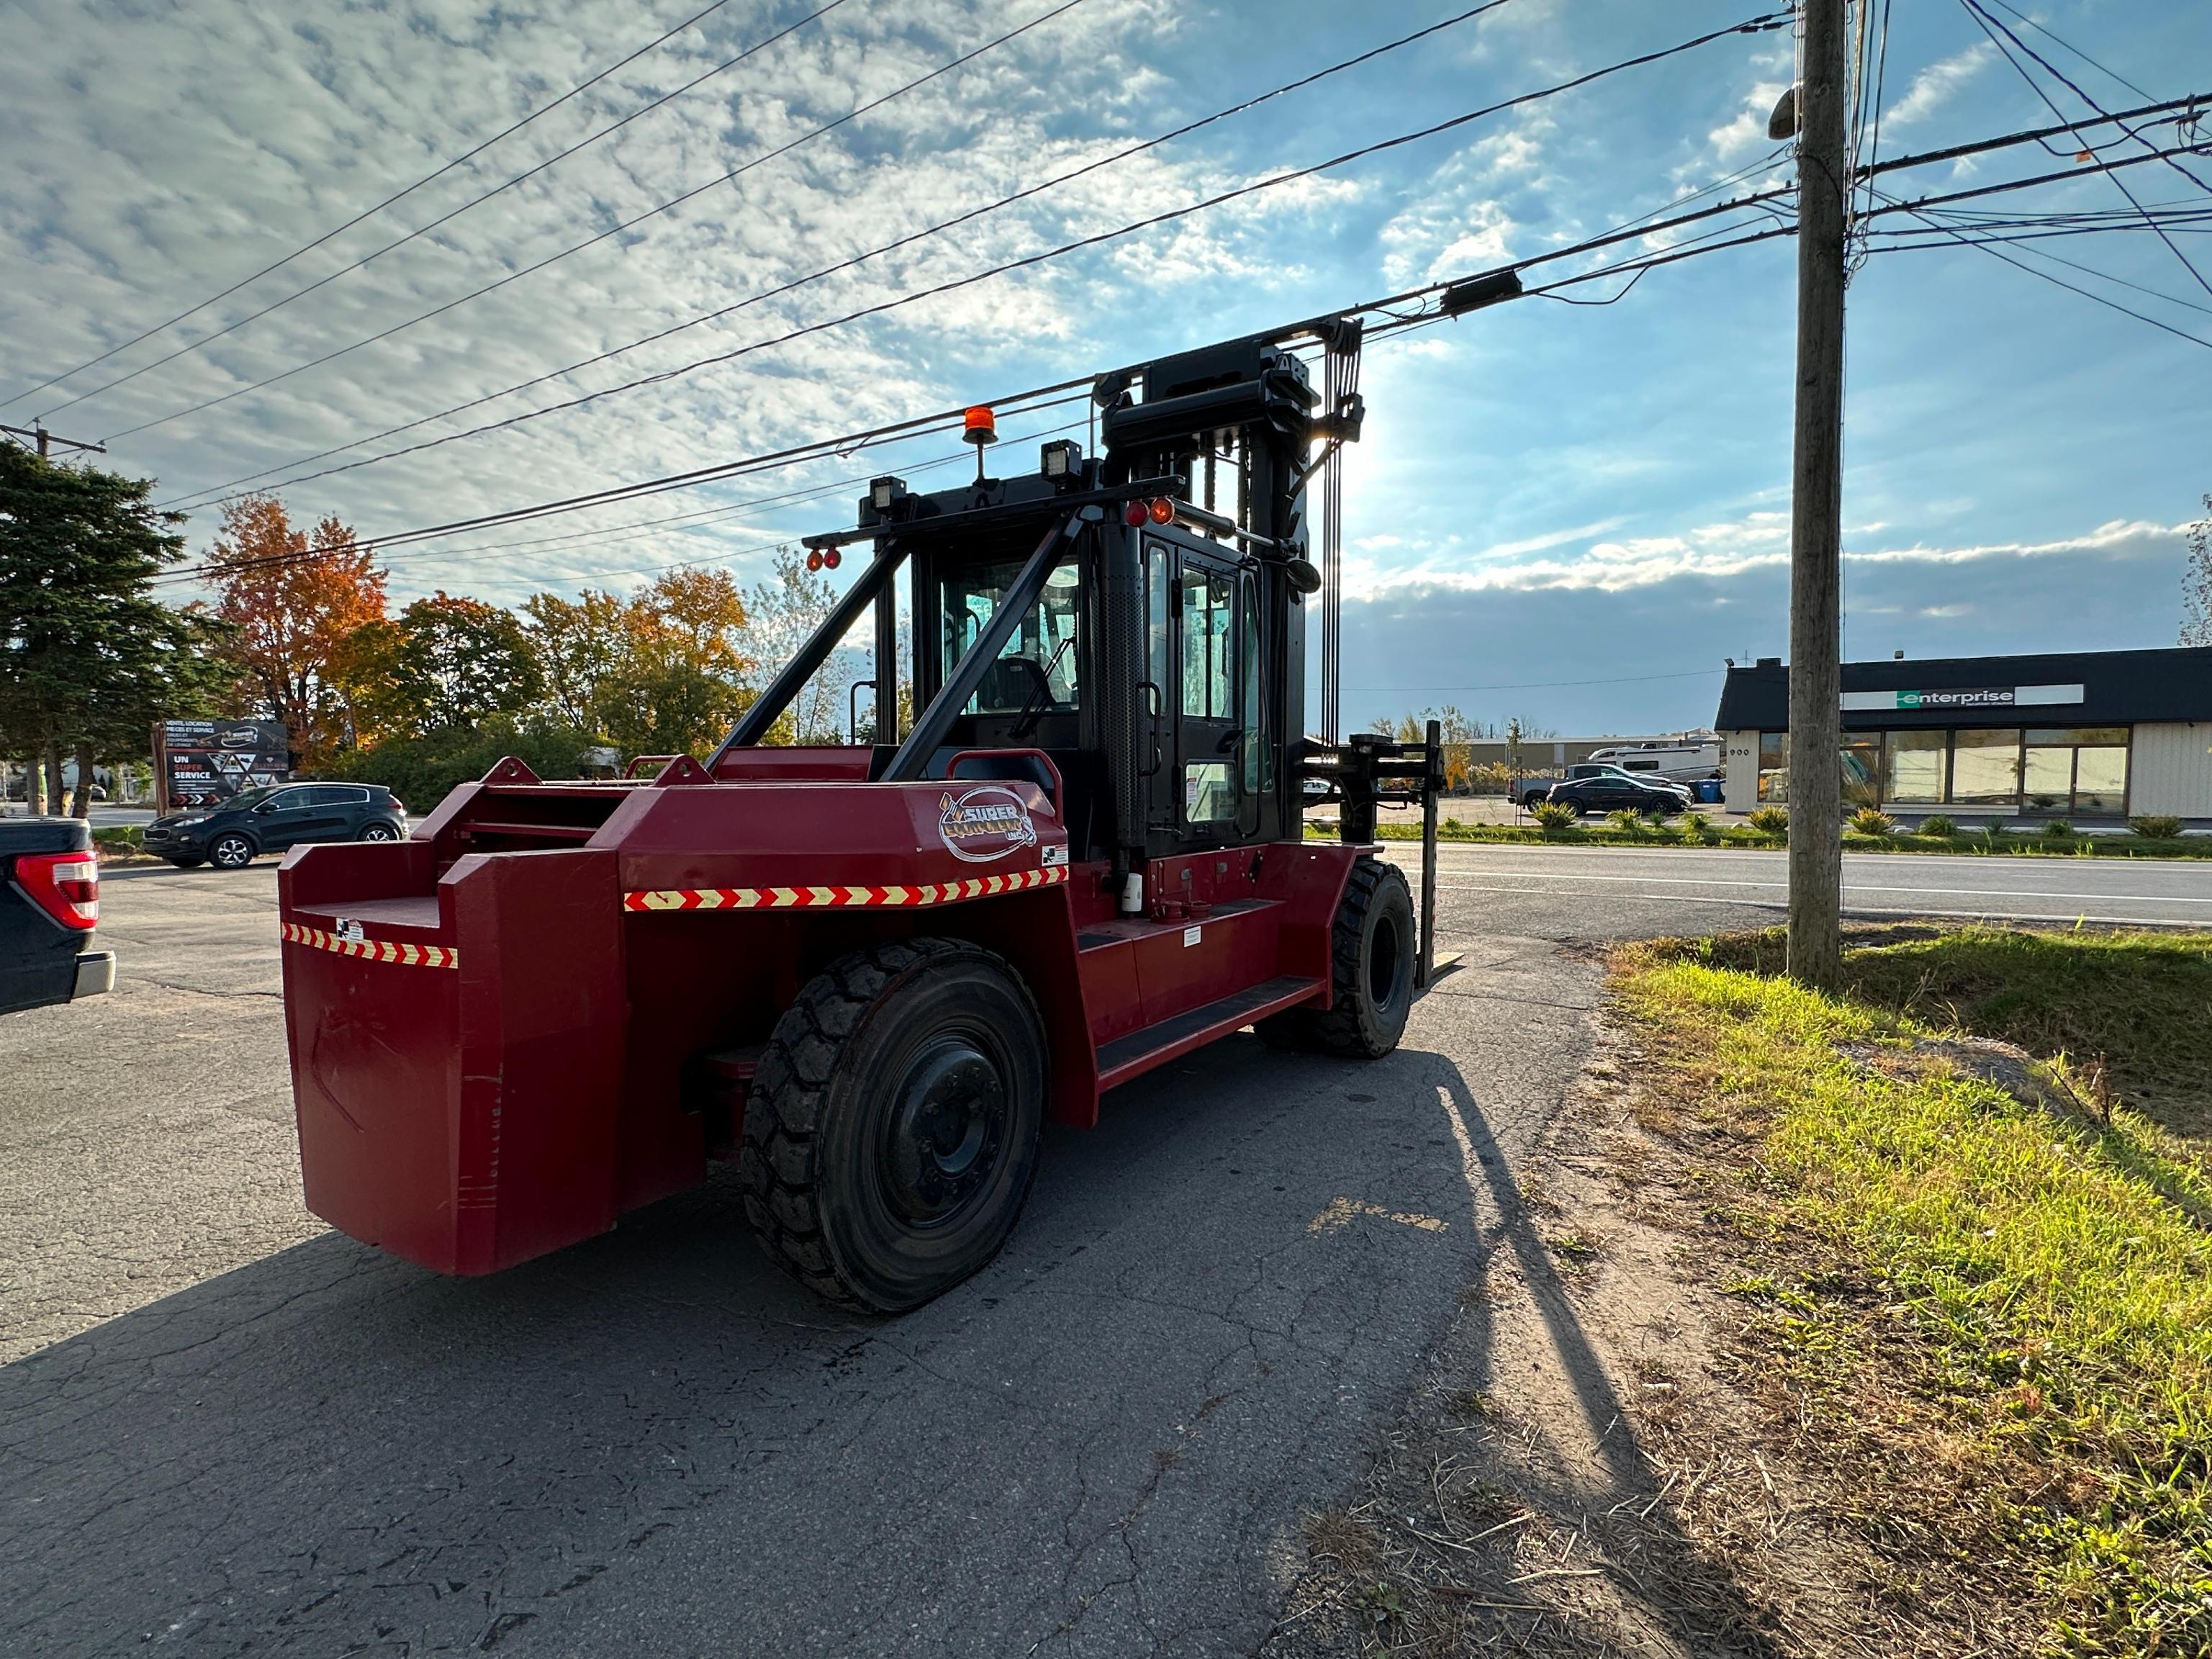 FORKLIFT Taylor TH350L FORKLIFT SN SBH33936 powered by Cummins diesel engine, equipped with cab,